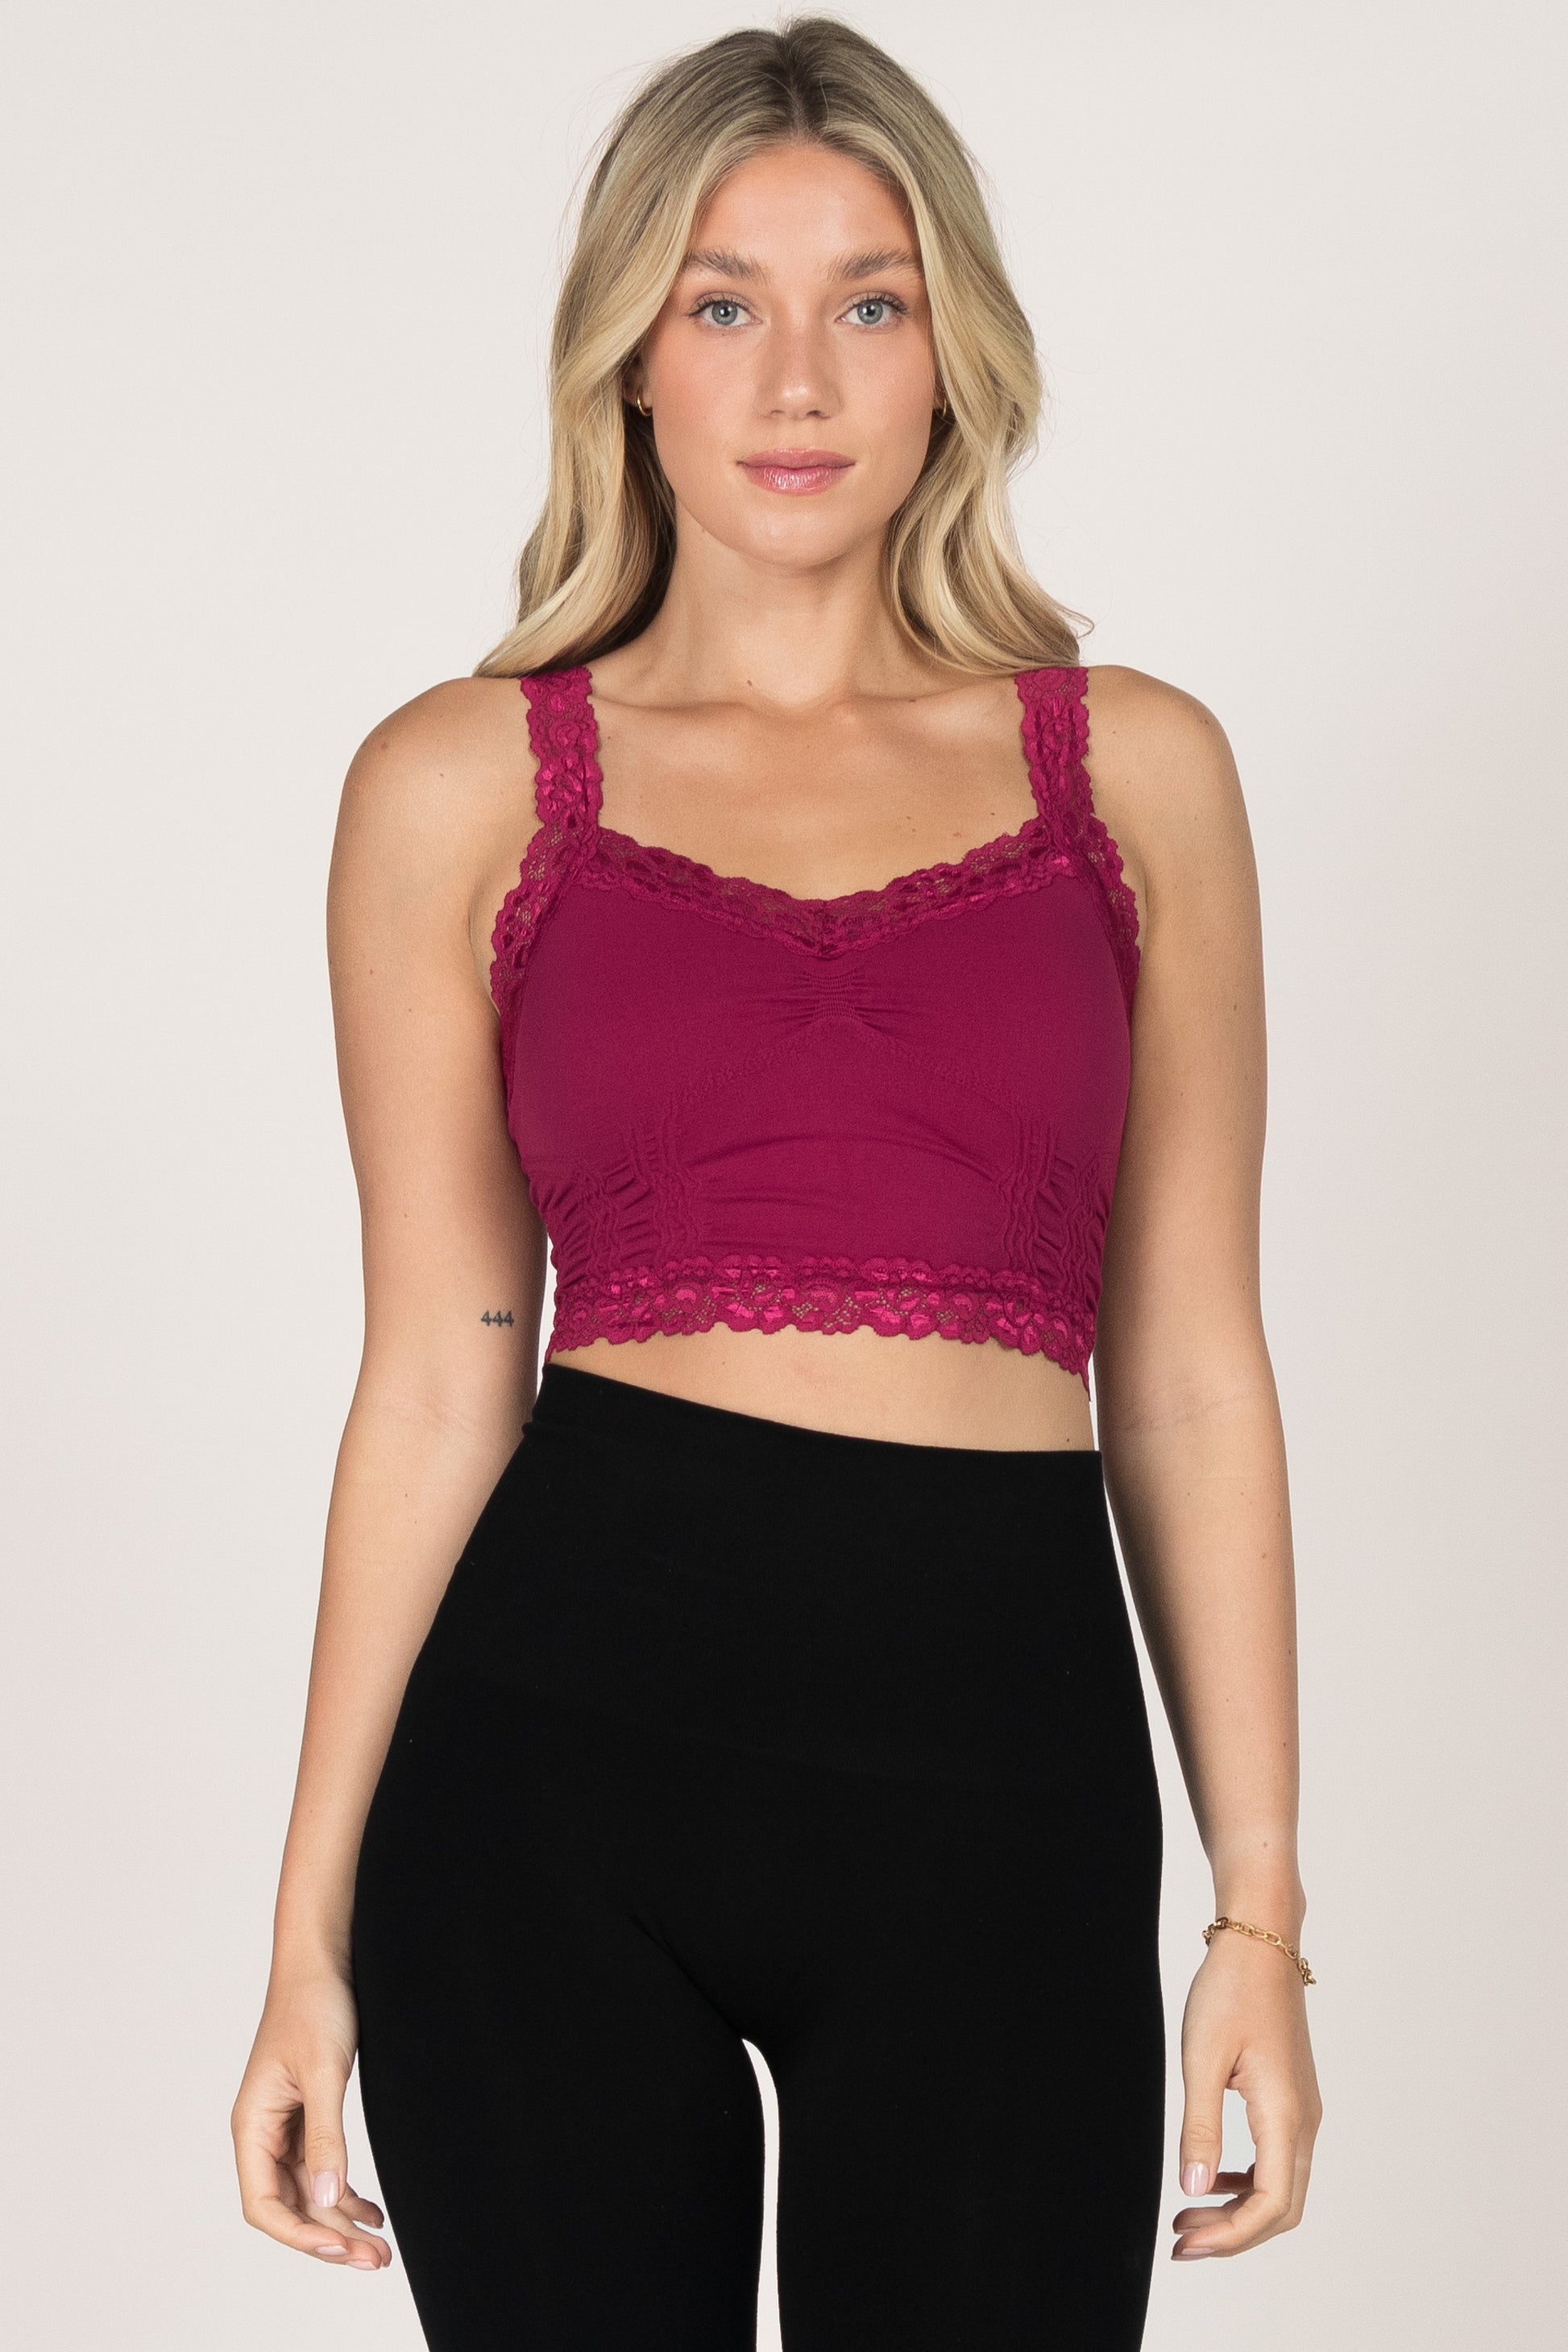 S&S Lace Bralette in Hot Pink – shopatanna